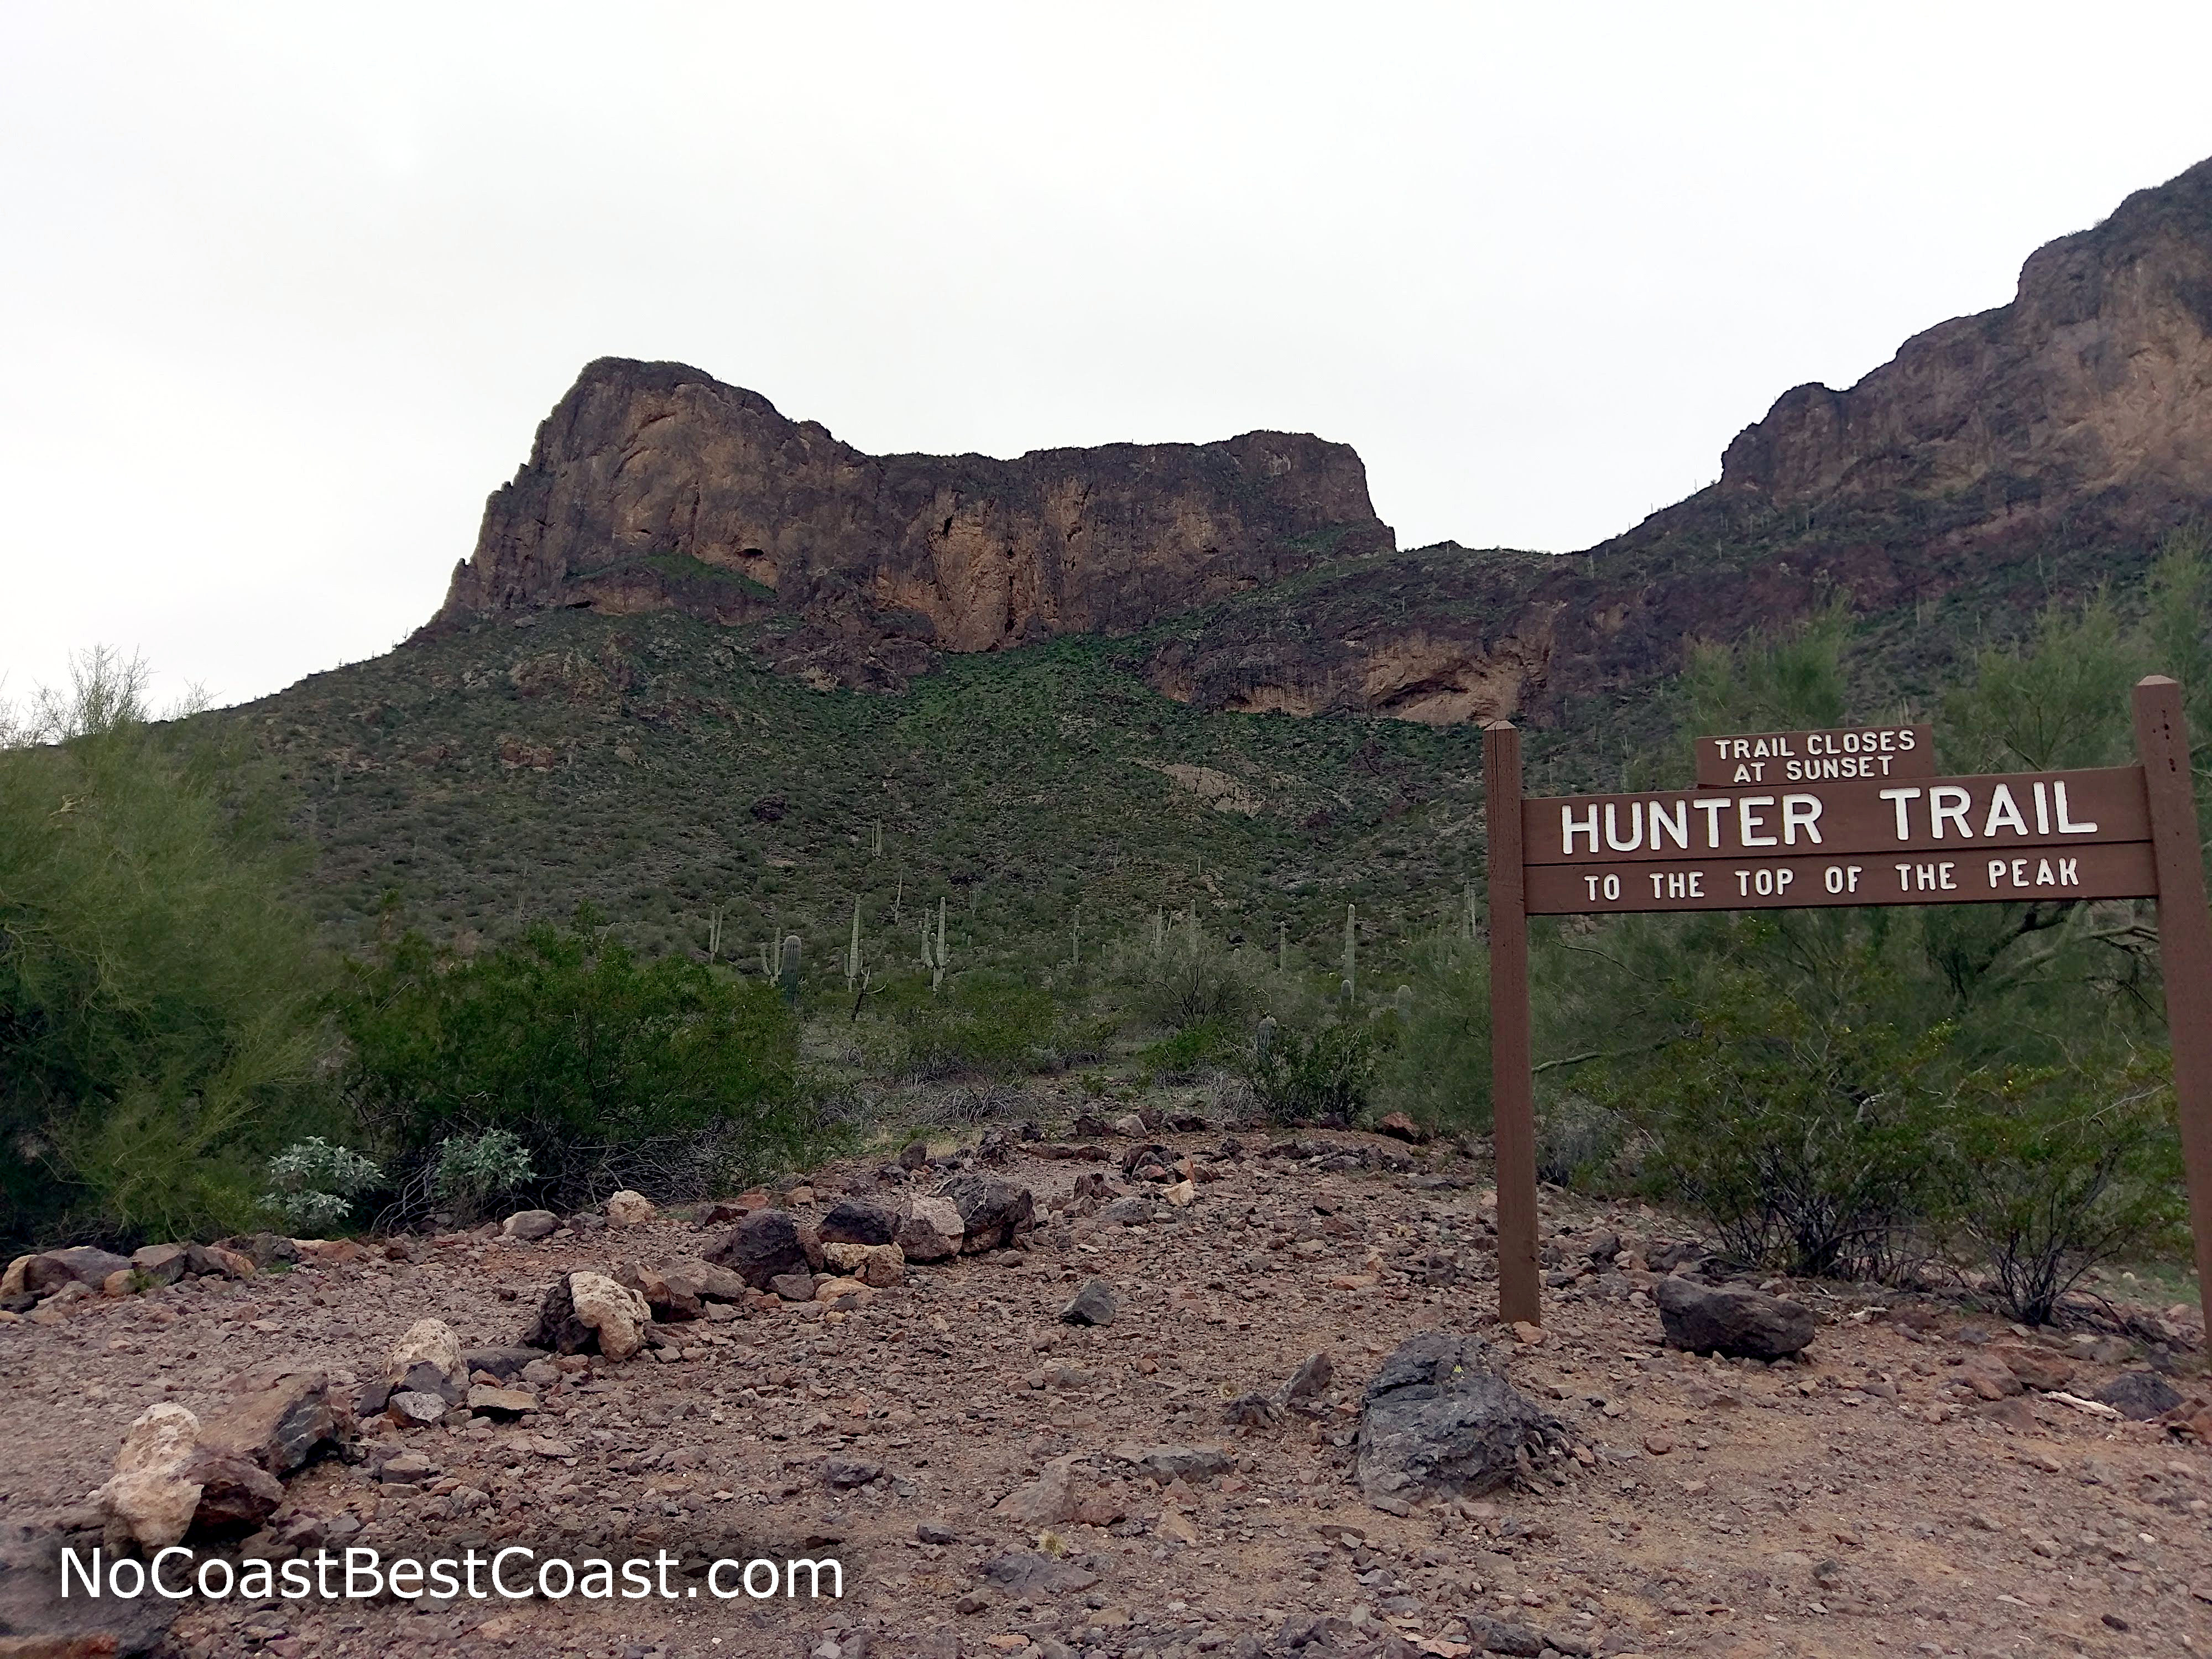 The start of the Hunter Trail with Picacho Peak looming above